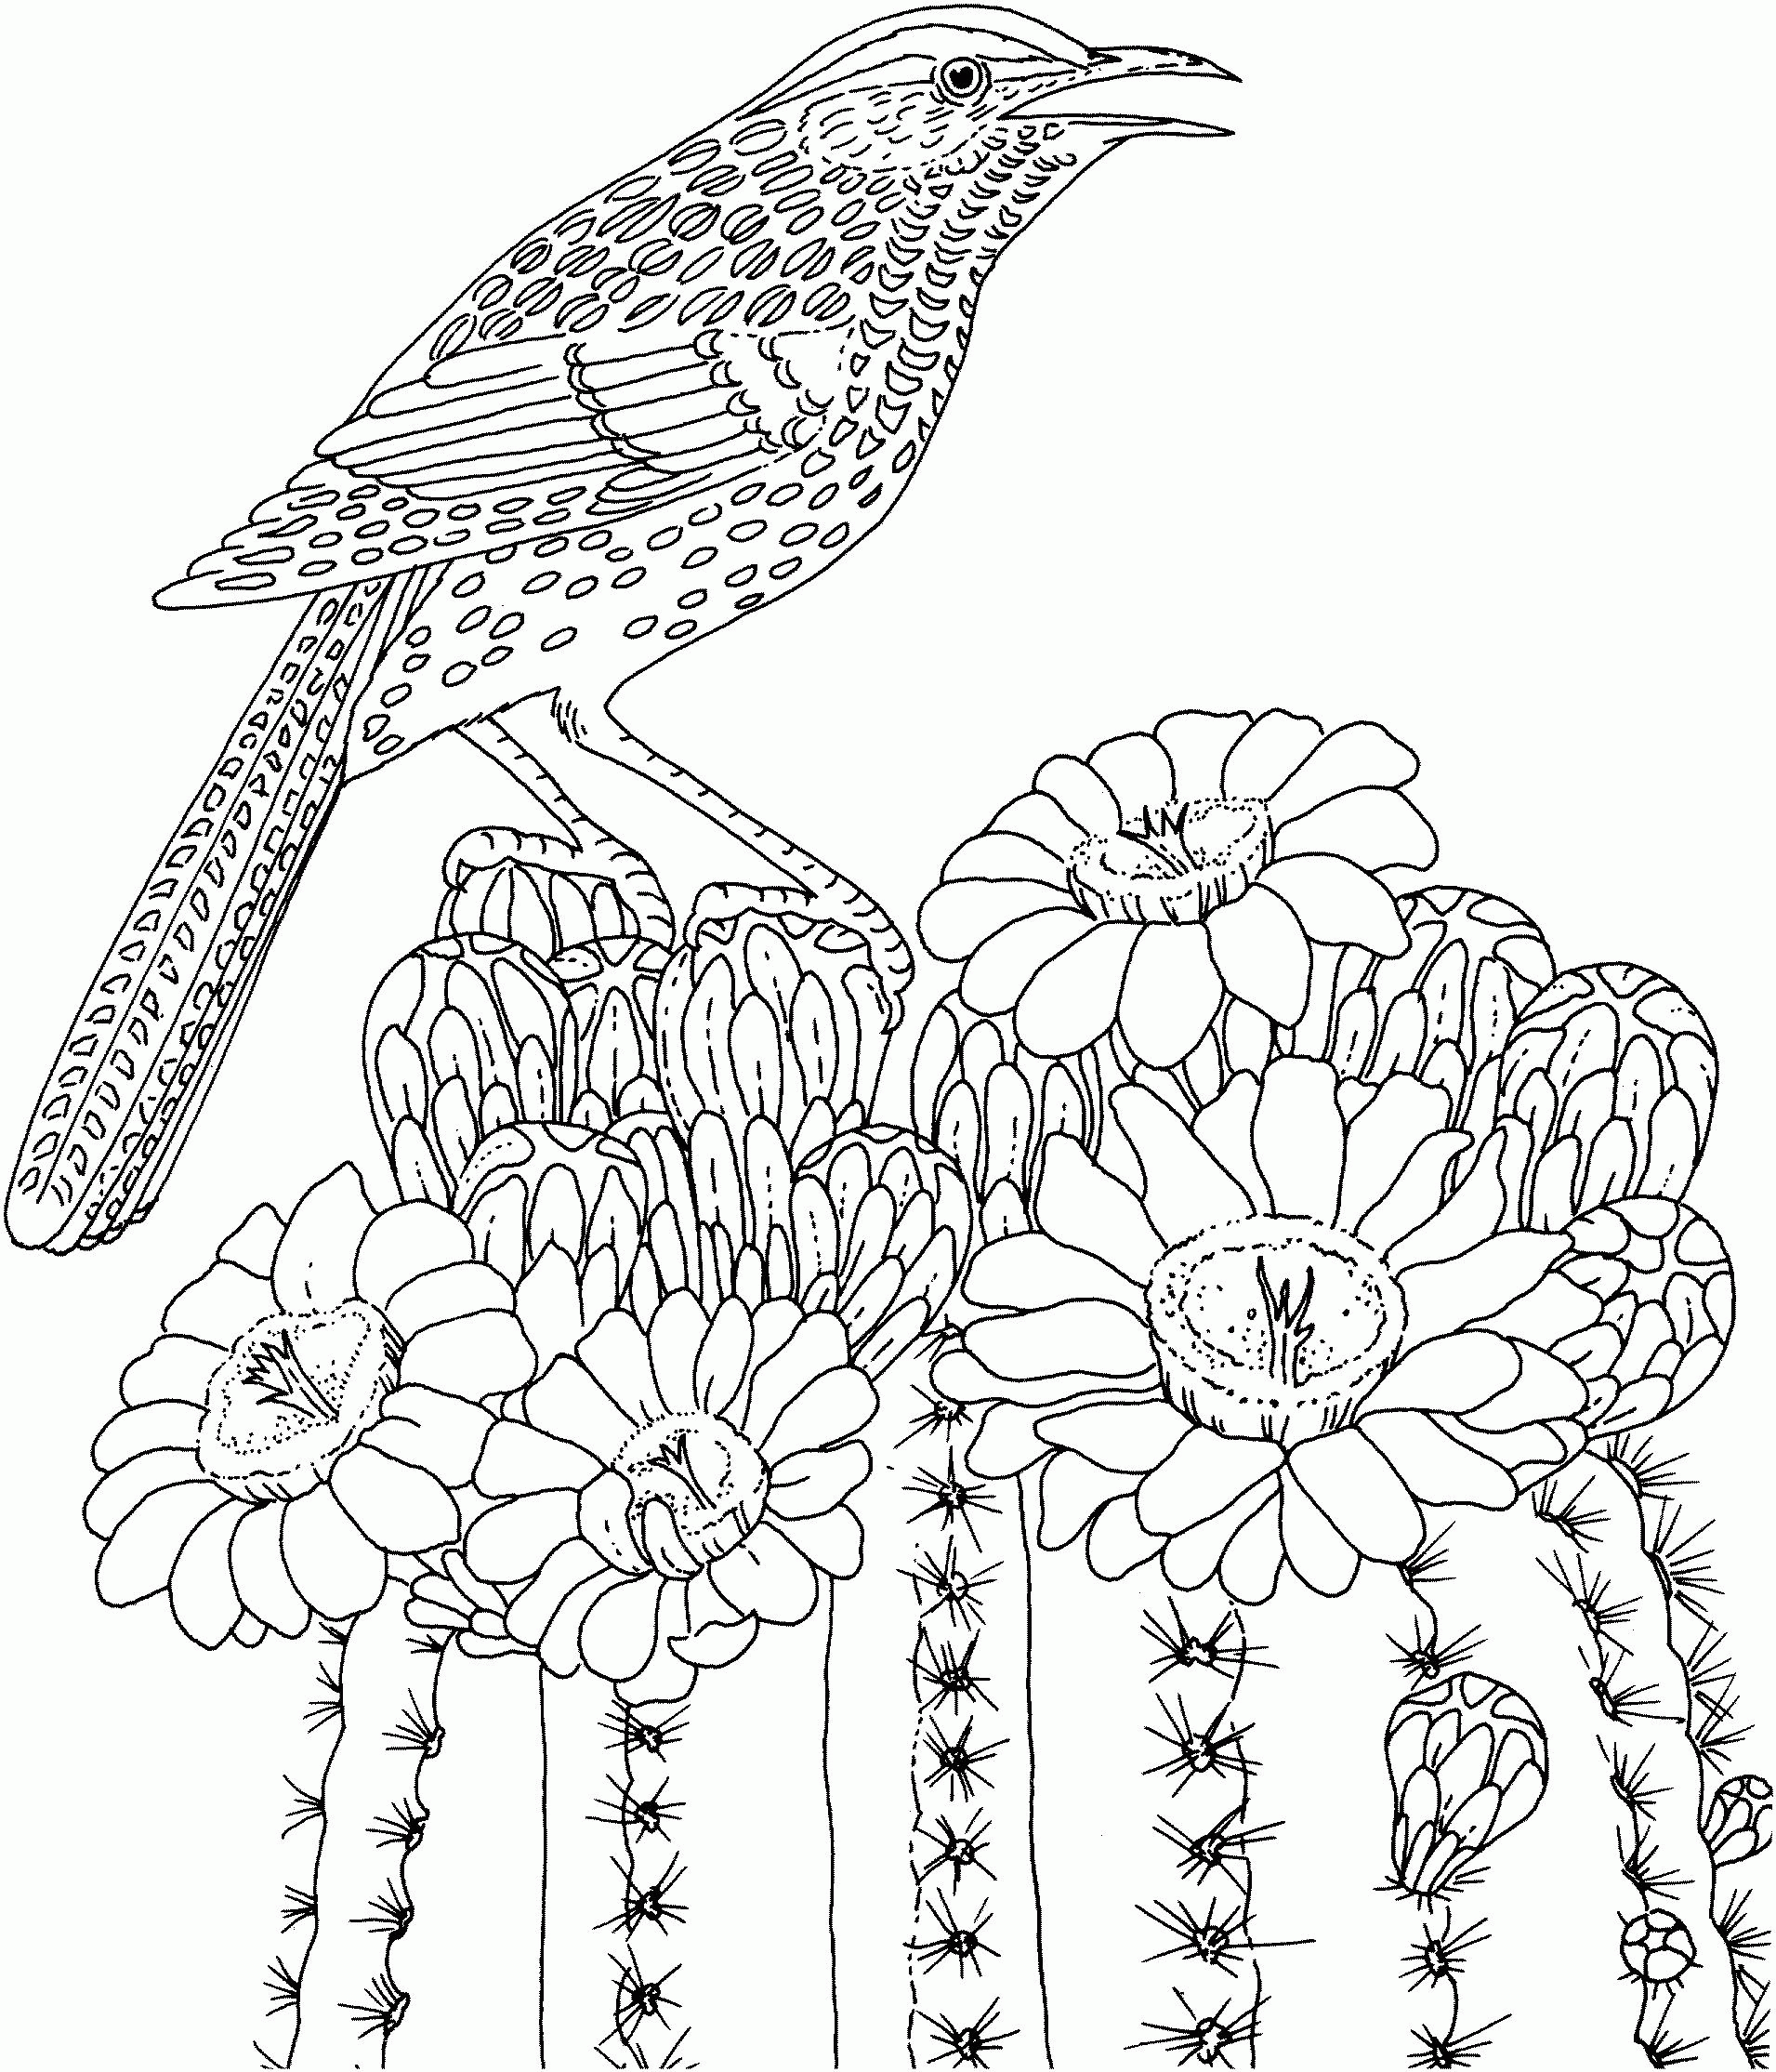 Ordinary Animals Printable Coloring Pages #8 - Hard Coloring Pages ...